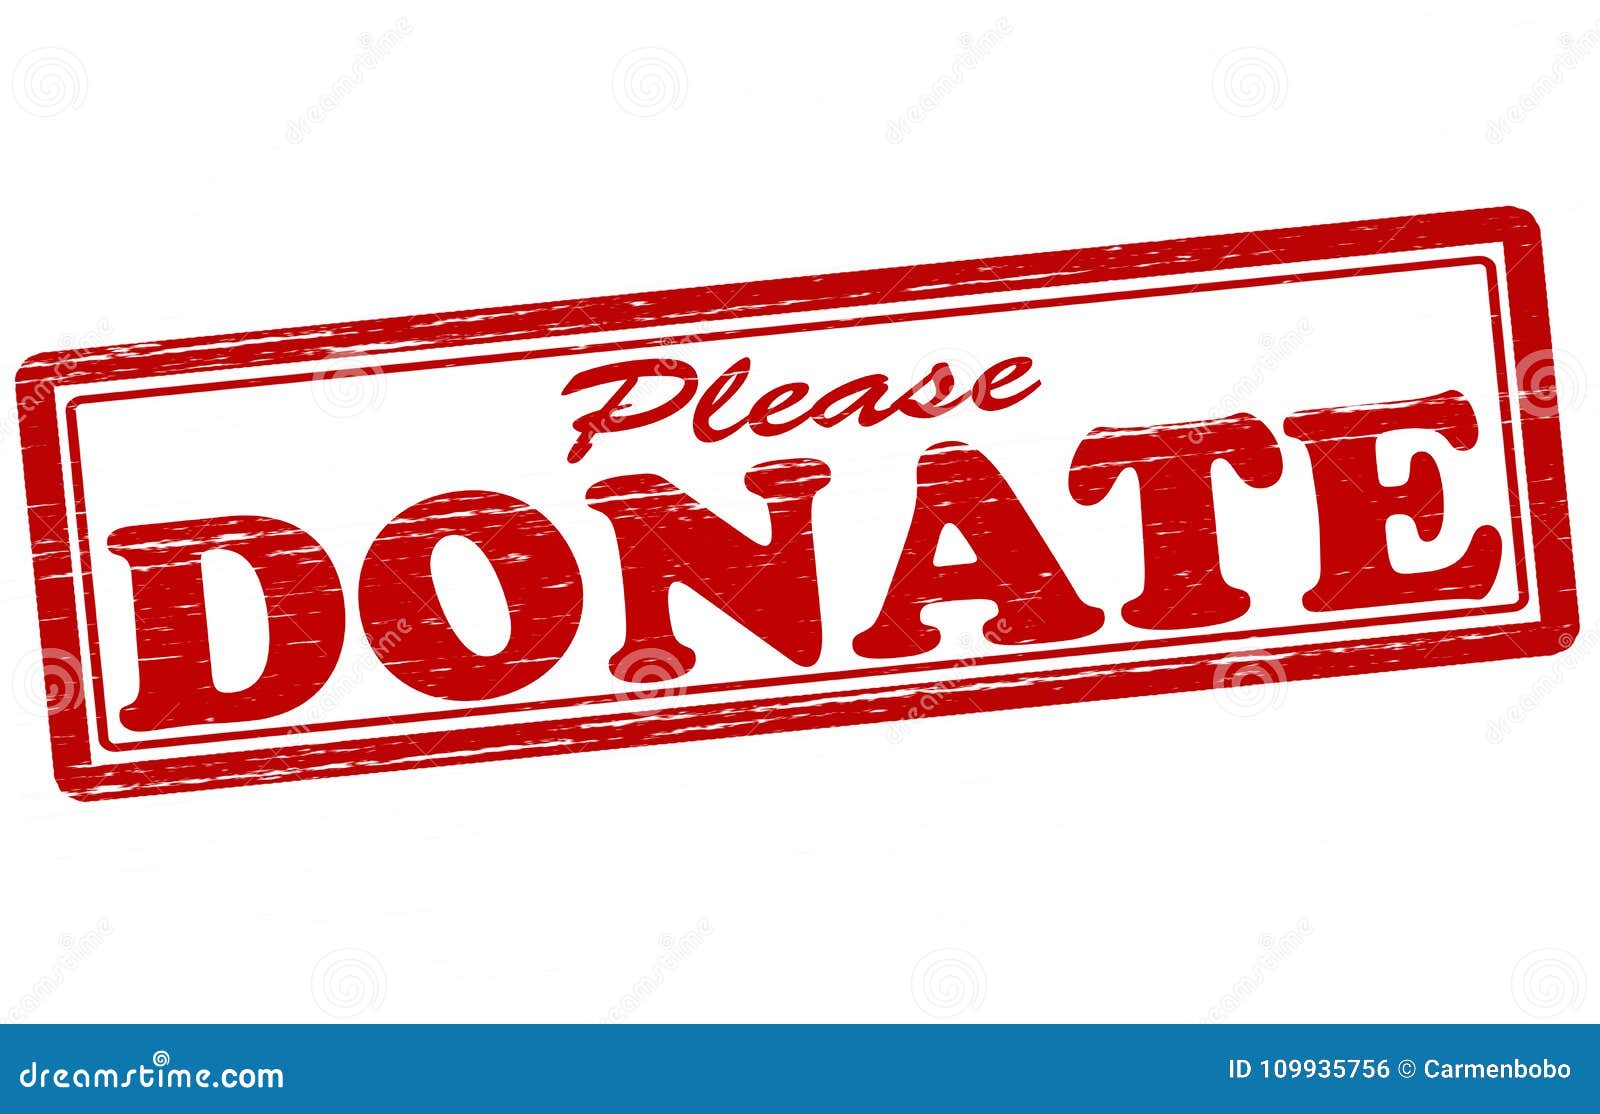 Please Donate Simple Donation Text Message Stock Illustration 1930236497